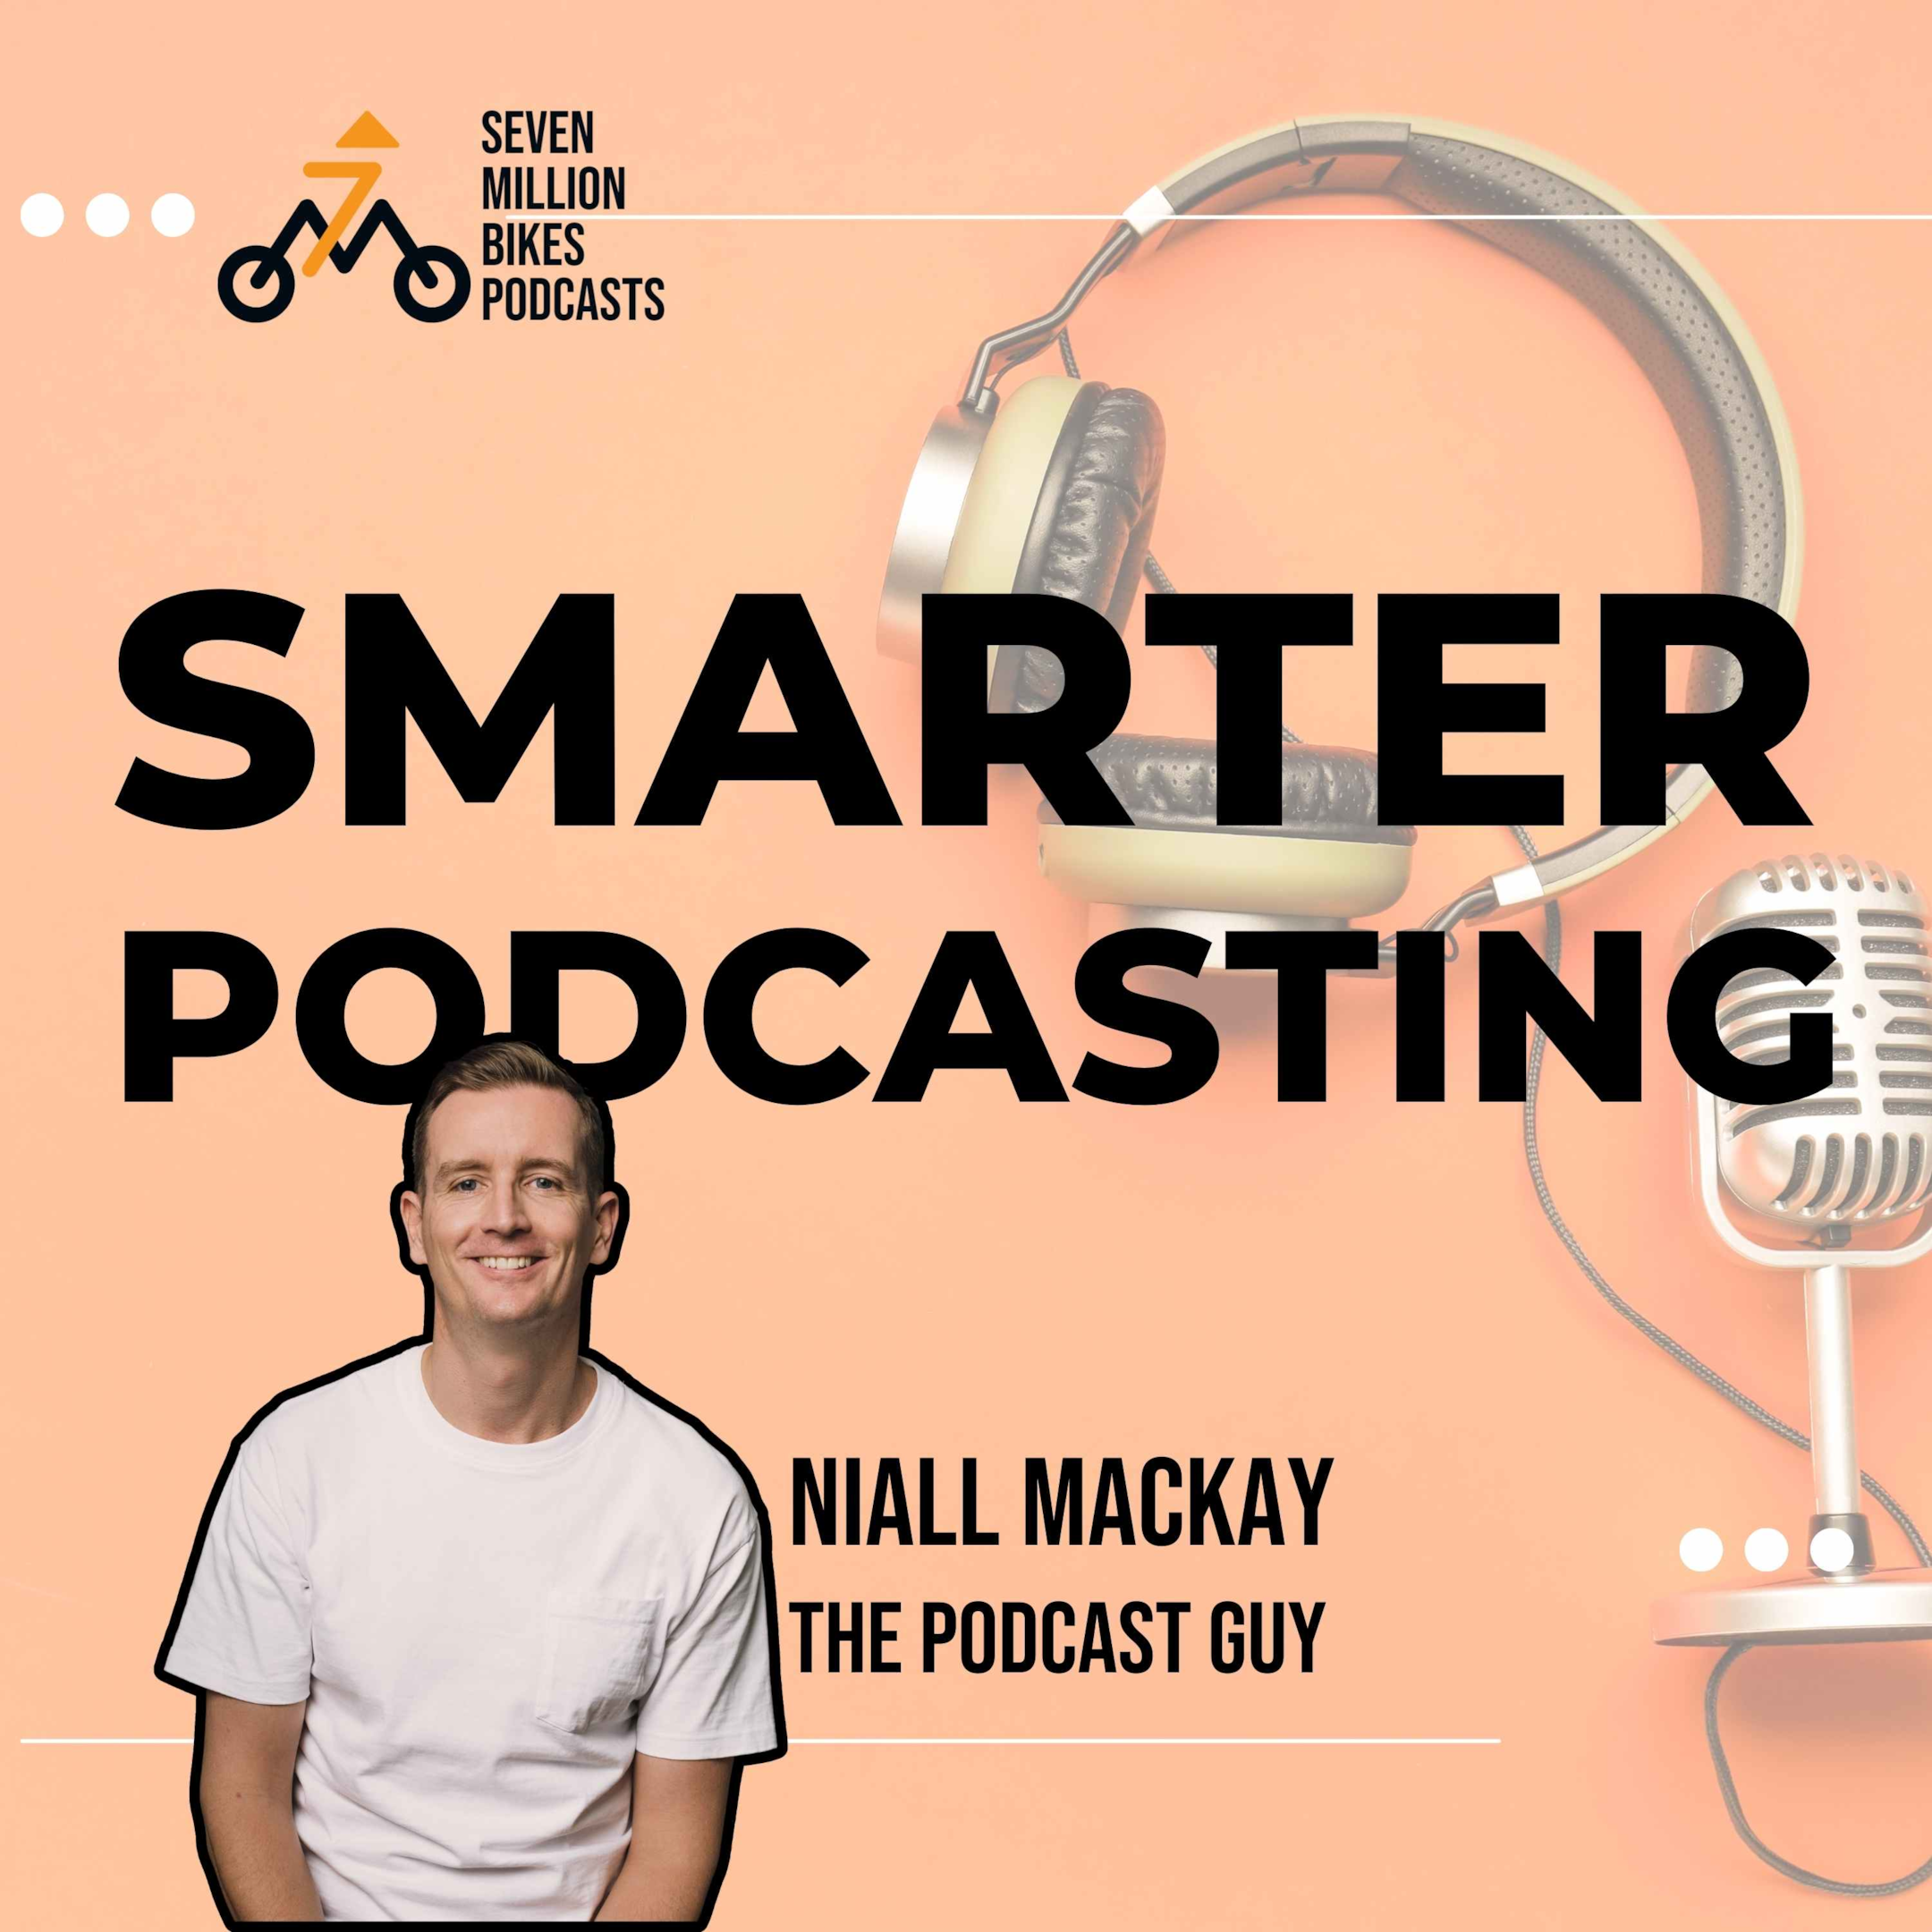 The Smarter Podcasting Cover